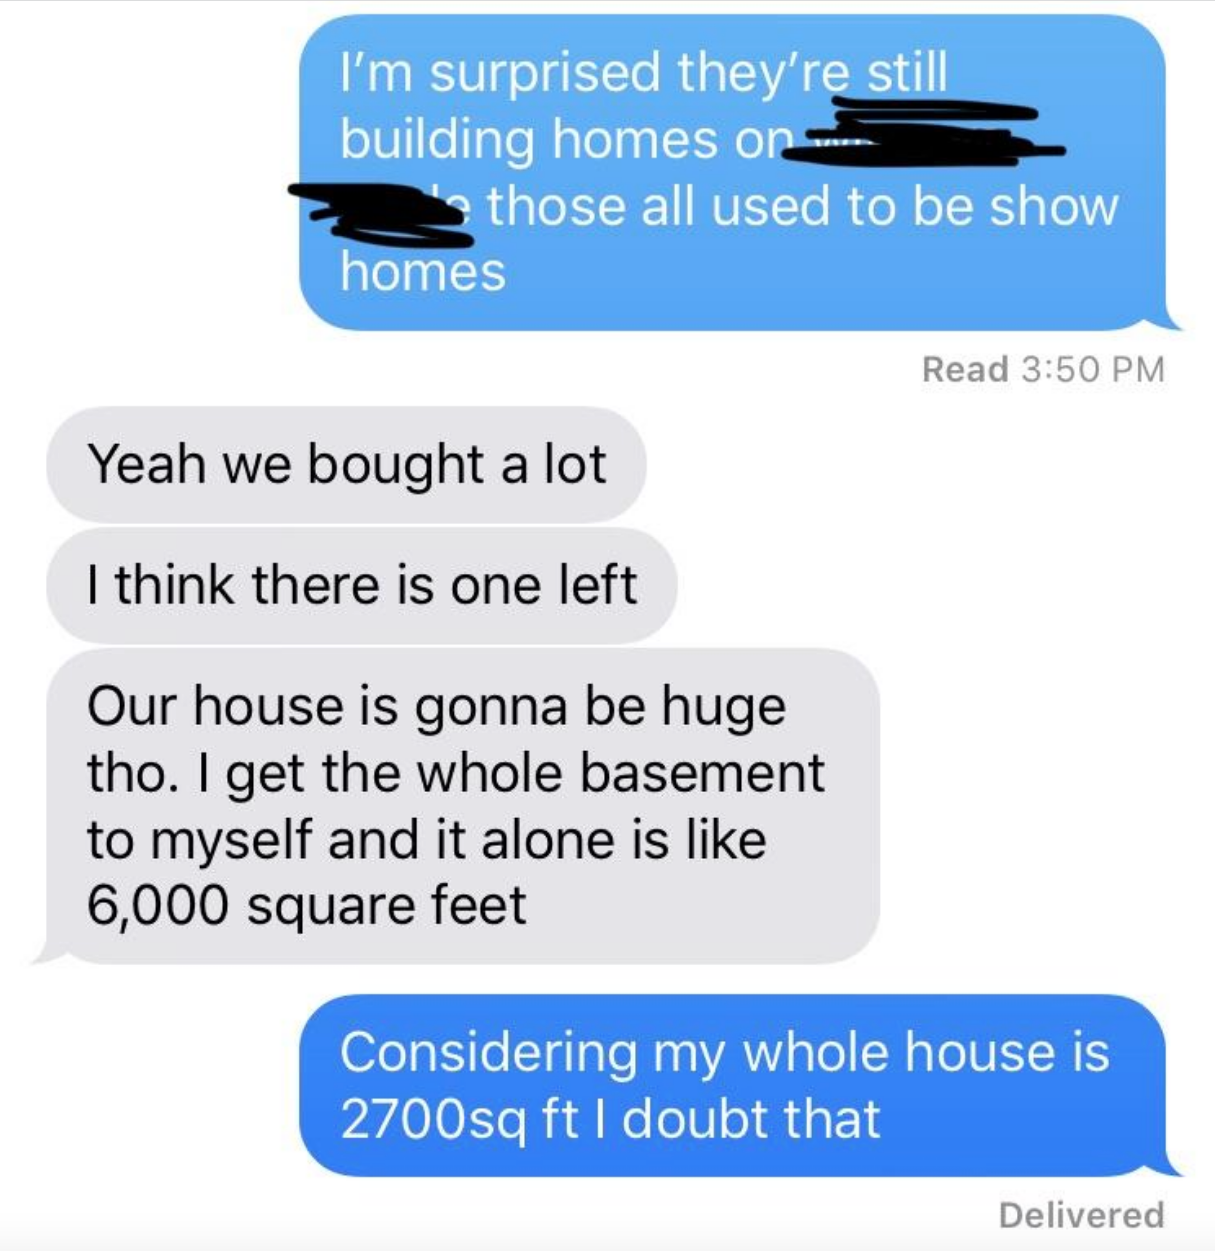 &quot;Considering my whole house is 2700sq ft I doubt that&quot;